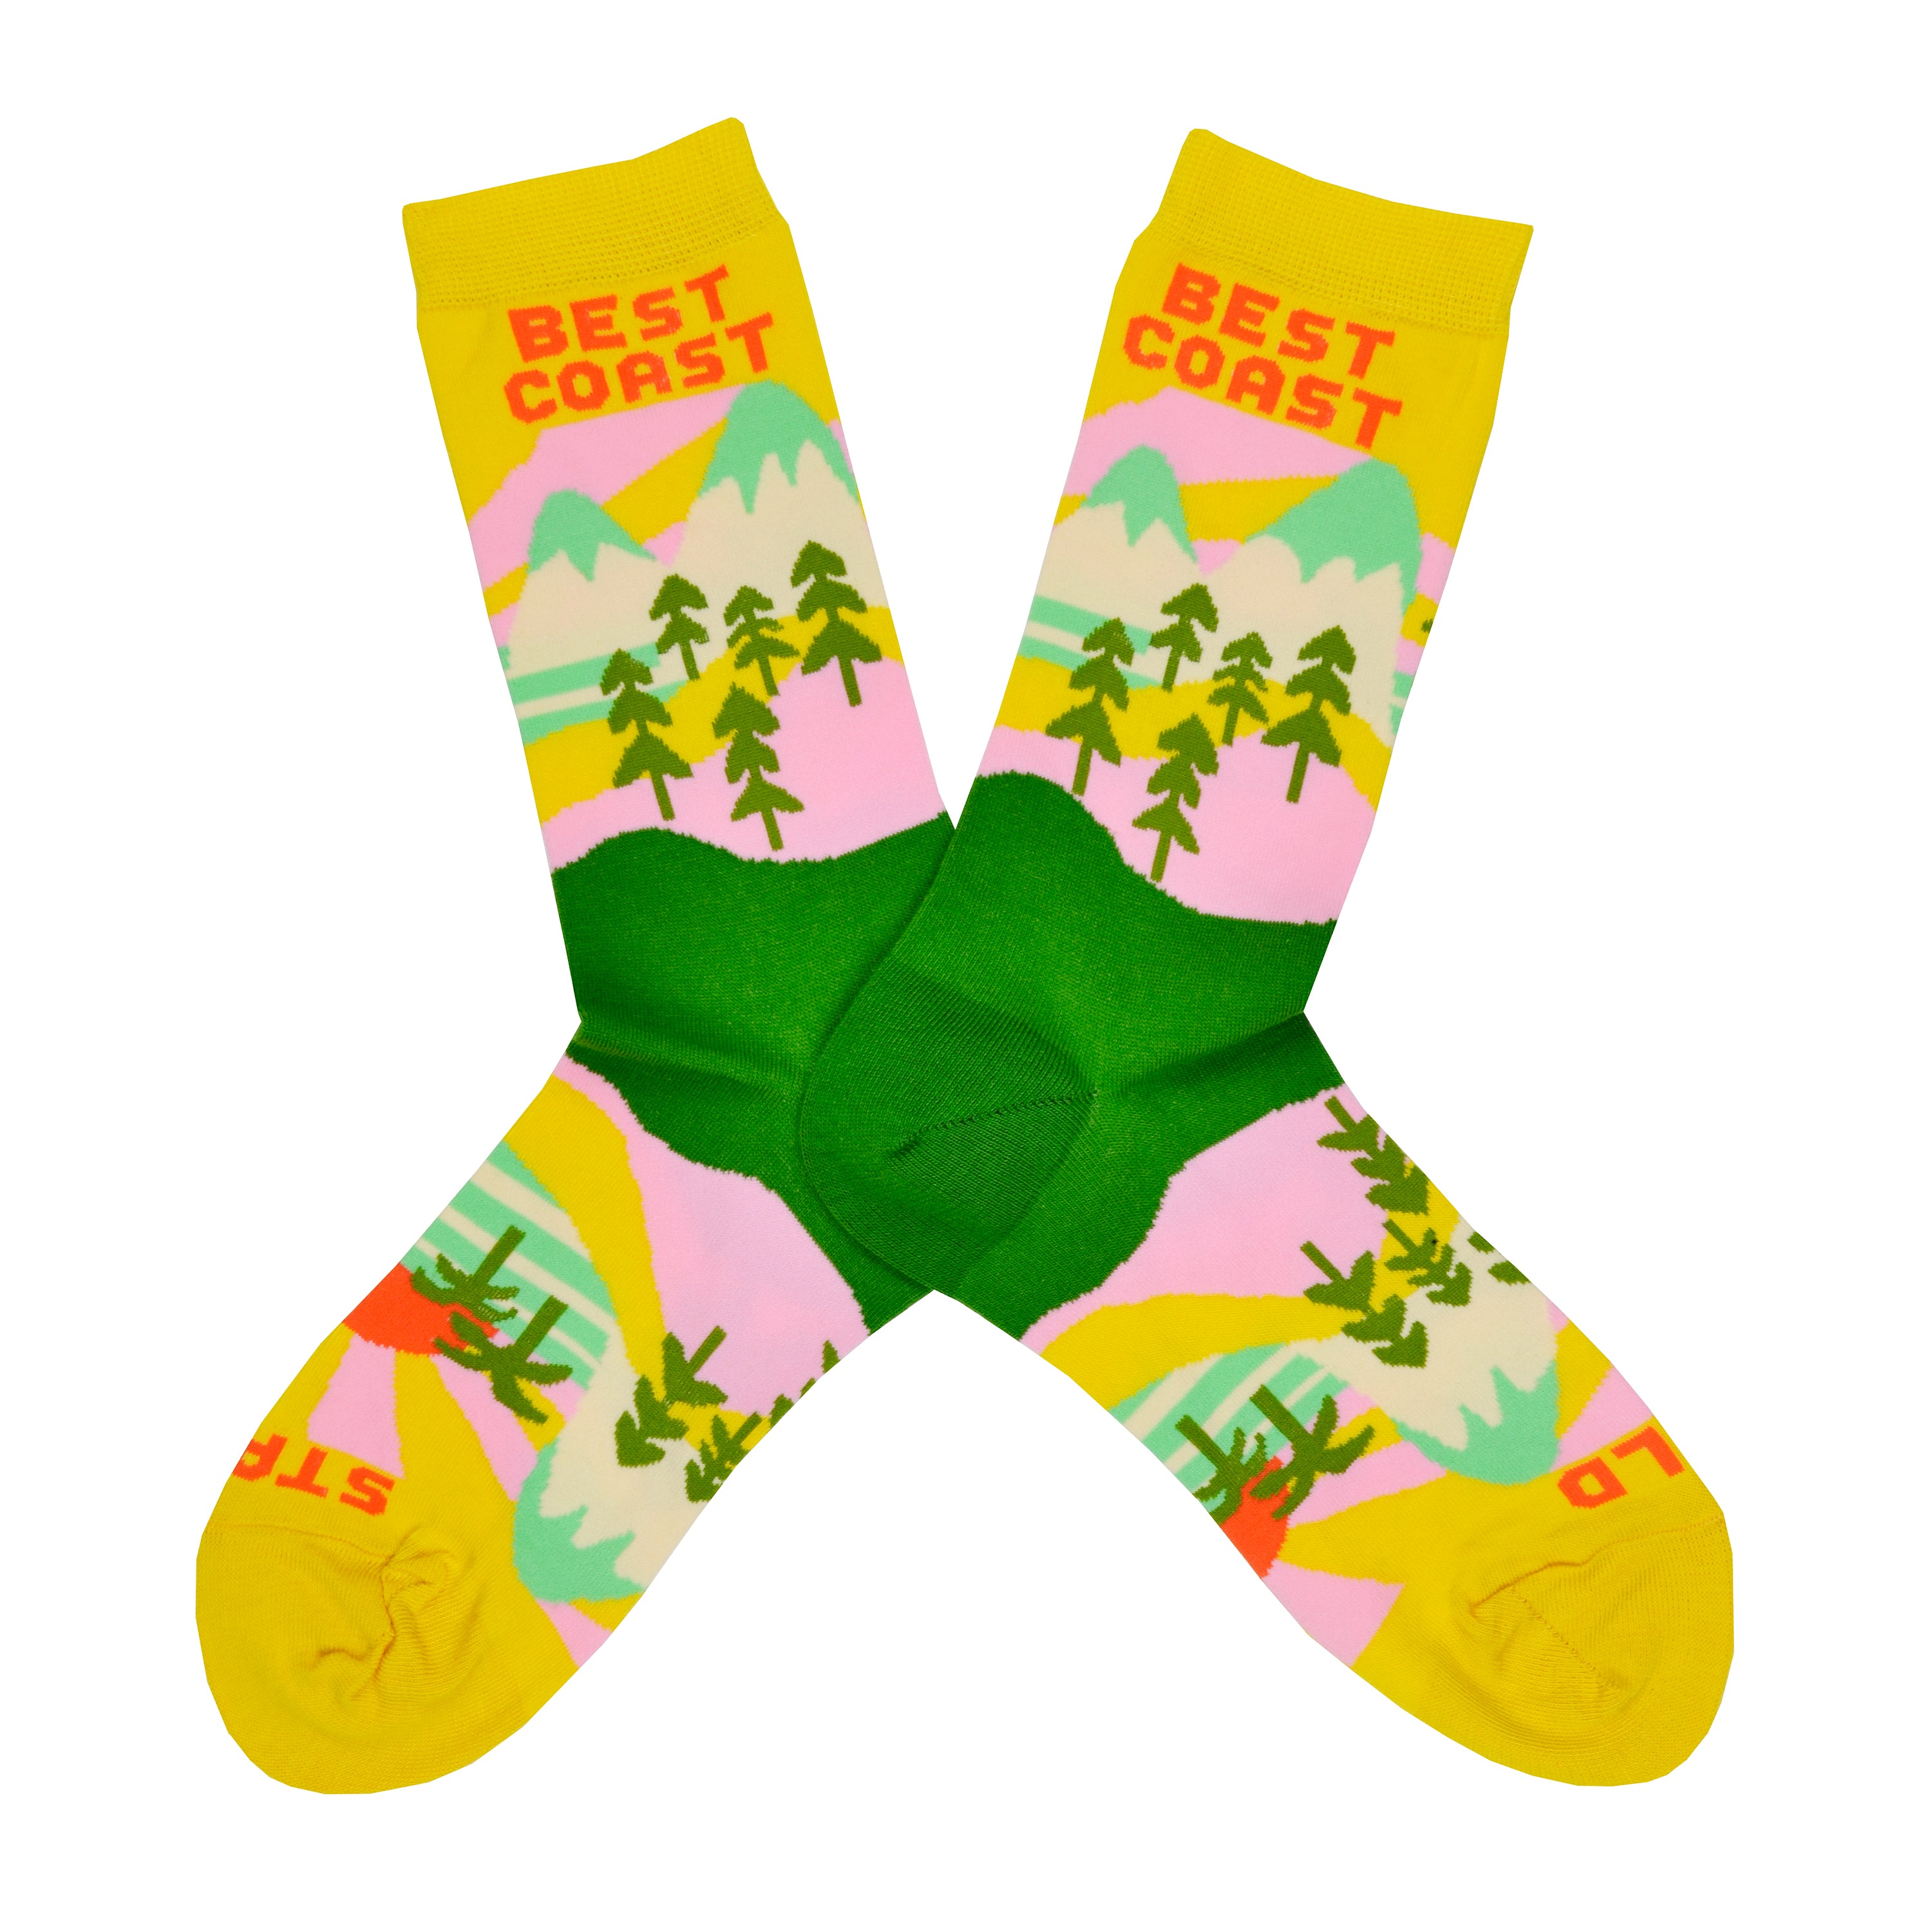 These yellow cotton women's novelty crew socks by the brand Yellow Owl Workshop feature green trees, teal and white mountains, and pink clouds and say the words 